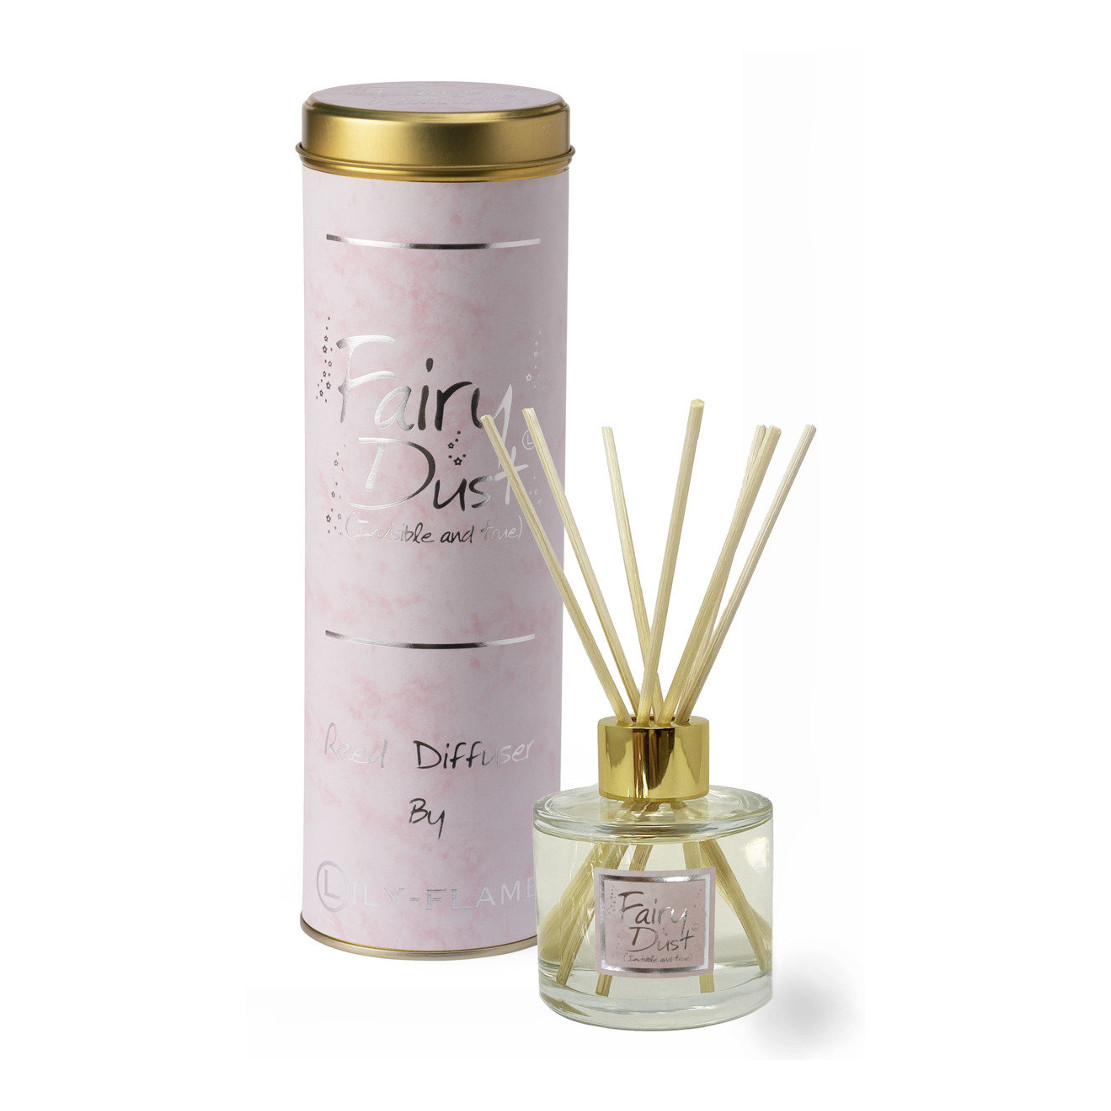 Lily Flame Fairy Dust Reed Diffuser